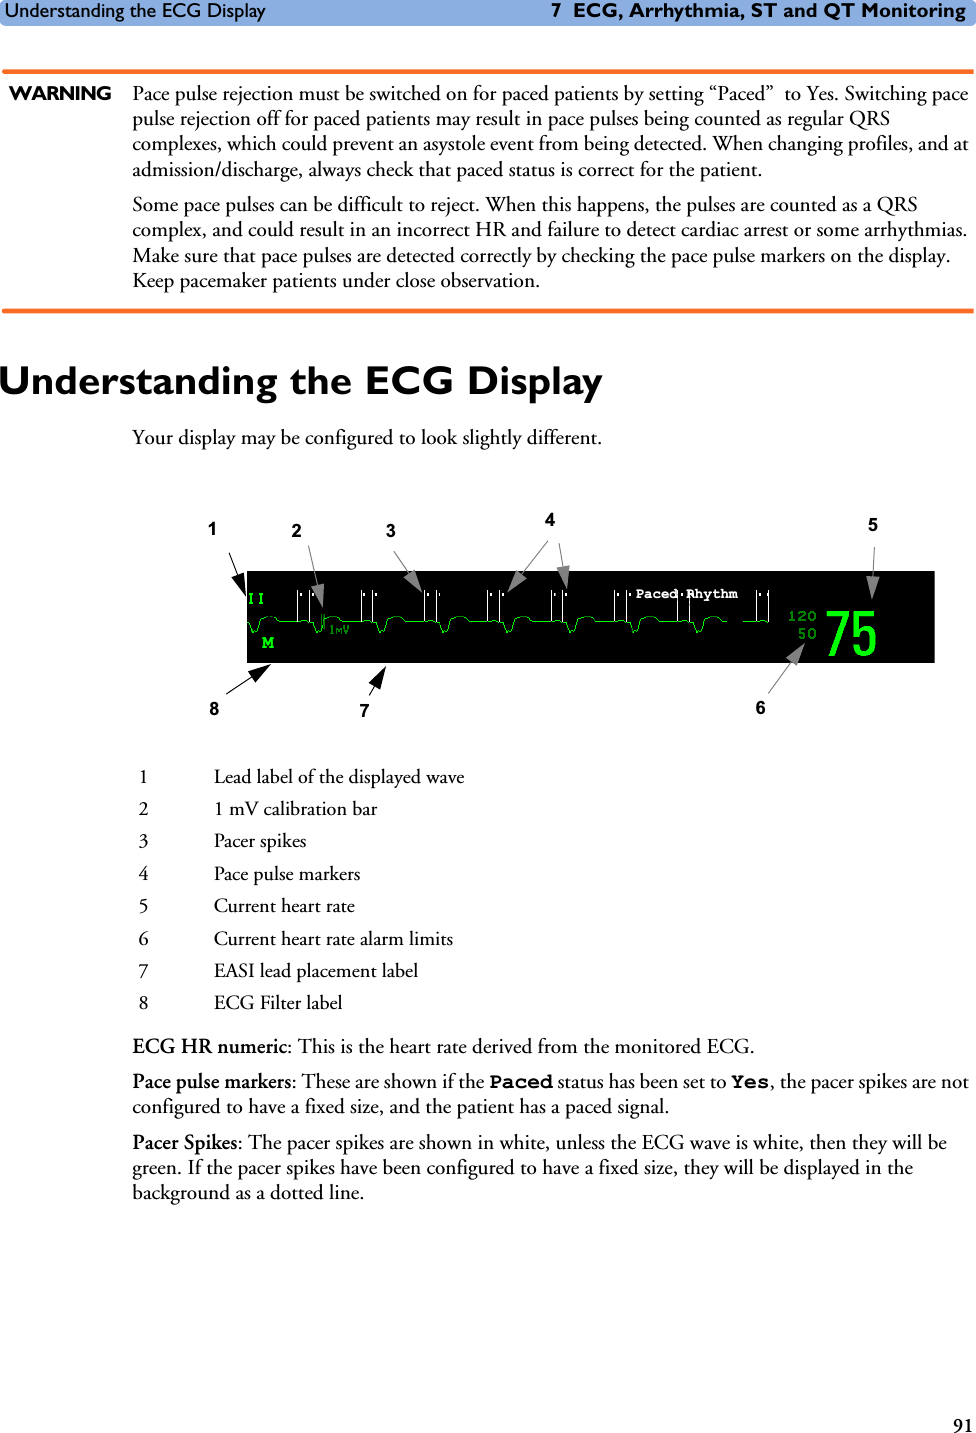 Understanding the ECG Display 7 ECG, Arrhythmia, ST and QT Monitoring91WARNING Pace pulse rejection must be switched on for paced patients by setting “Paced”  to Yes. Switching pace pulse rejection off for paced patients may result in pace pulses being counted as regular QRS complexes, which could prevent an asystole event from being detected. When changing profiles, and at admission/discharge, always check that paced status is correct for the patient.Some pace pulses can be difficult to reject. When this happens, the pulses are counted as a QRS complex, and could result in an incorrect HR and failure to detect cardiac arrest or some arrhythmias. Make sure that pace pulses are detected correctly by checking the pace pulse markers on the display. Keep pacemaker patients under close observation.Understanding the ECG DisplayYour display may be configured to look slightly different.ECG HR numeric: This is the heart rate derived from the monitored ECG. Pace pulse markers: These are shown if the Paced status has been set to Yes, the pacer spikes are not configured to have a fixed size, and the patient has a paced signal.Pacer Spikes: The pacer spikes are shown in white, unless the ECG wave is white, then they will be green. If the pacer spikes have been configured to have a fixed size, they will be displayed in the background as a dotted line.1 Lead label of the displayed wave2 1 mV calibration bar3Pacer spikes4 Pace pulse markers5 Current heart rate6 Current heart rate alarm limits7 EASI lead placement label8 ECG Filter labelEASIMHR bpm4816573Paced Rhythm2